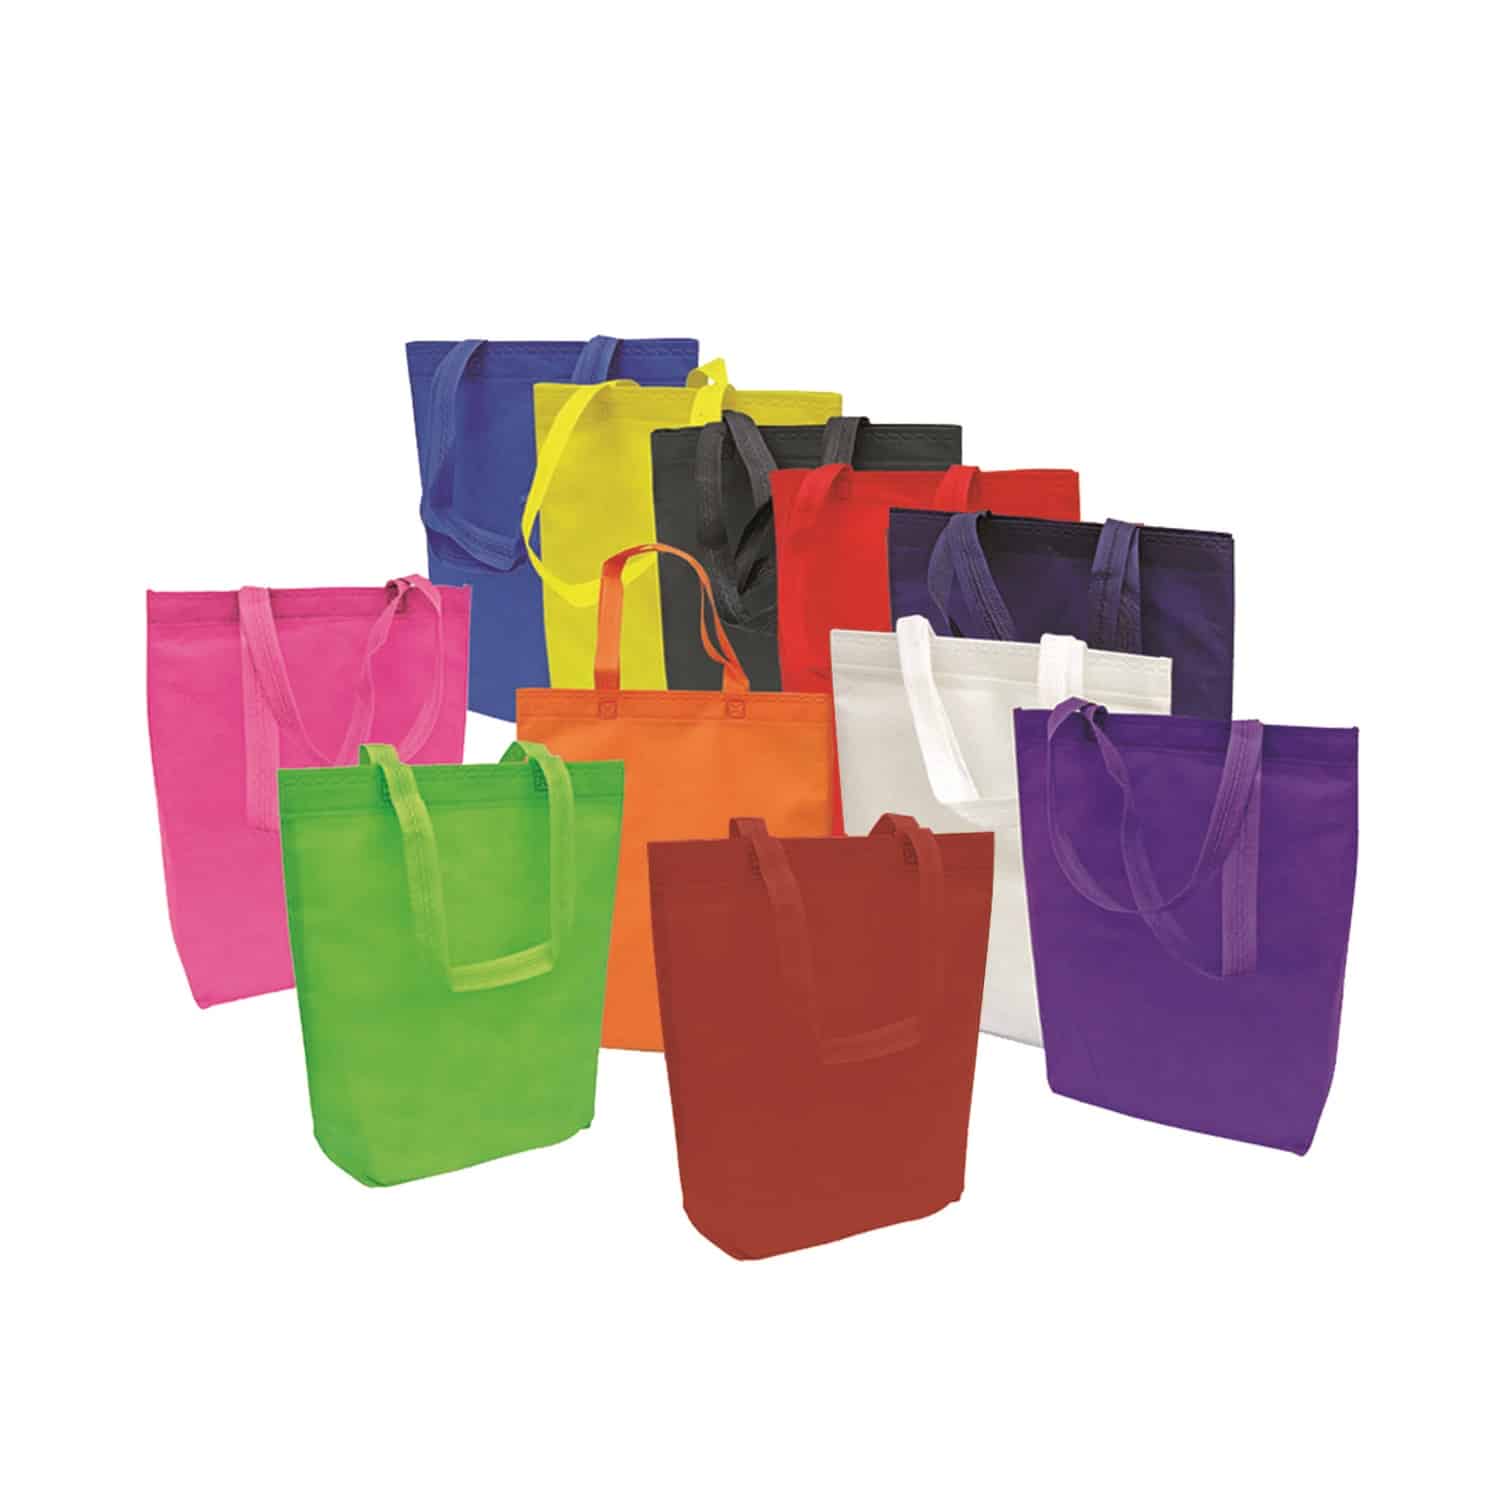 Non Woven Bag at SJ-World Gifts Malaysia | Trusted Premium Gifts and Corporate Gifts Malaysia Supplier